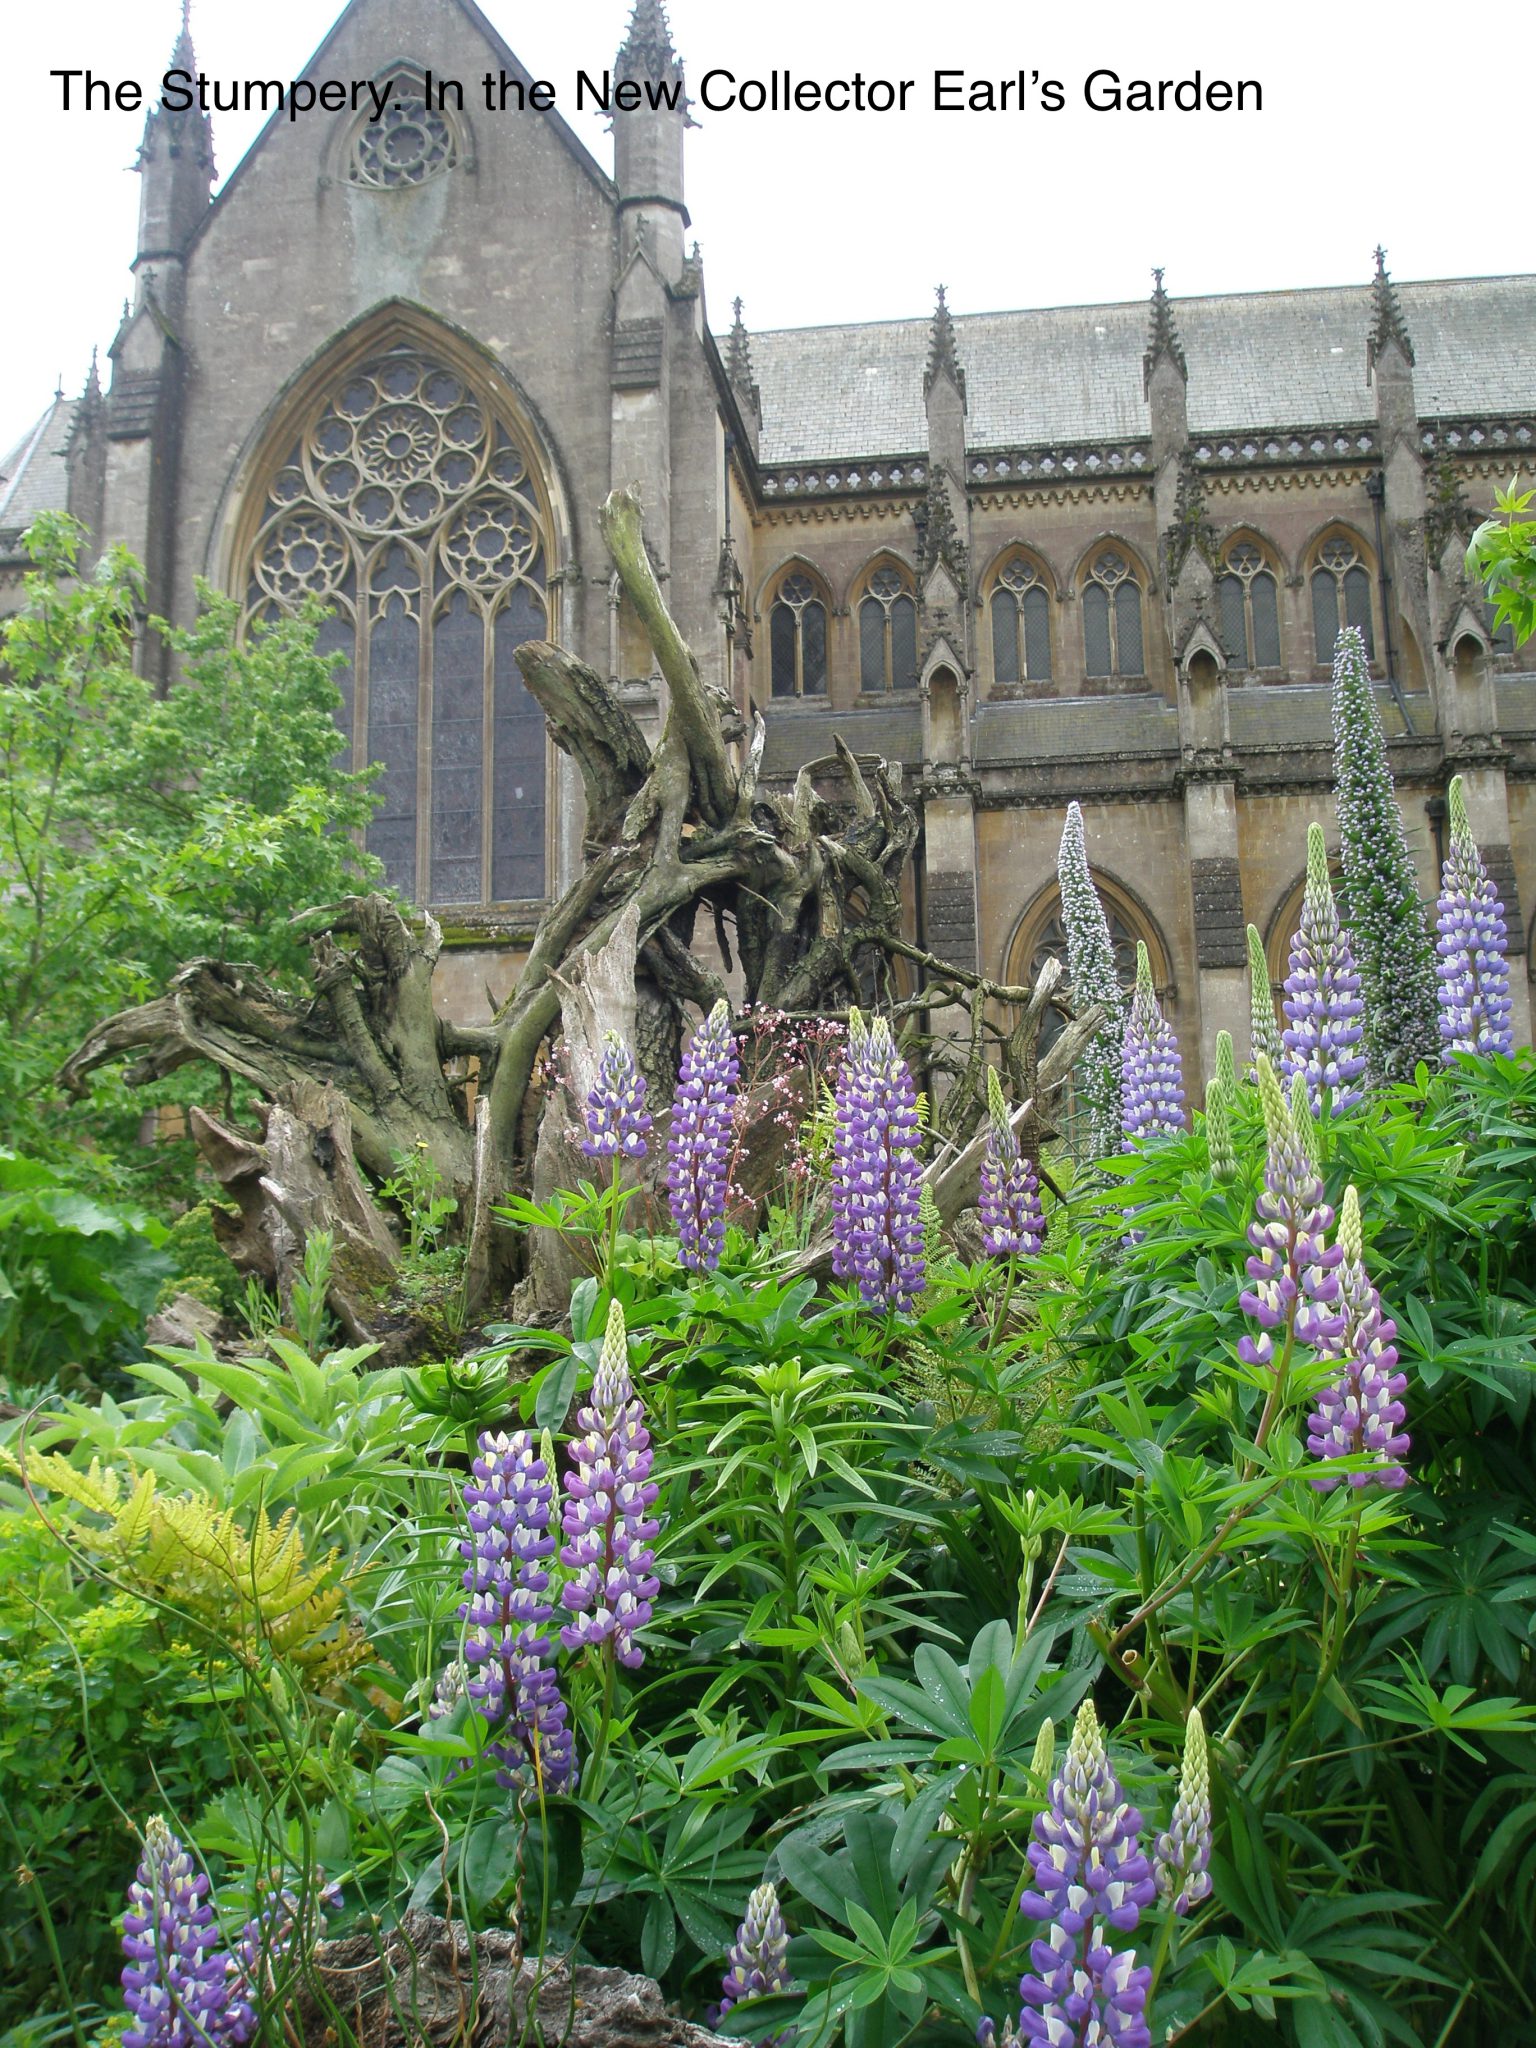 A final look at the Stumpery...and see how the blossoms of the Lupine mimic the shapes and tracery of the Cathedral windows! This is gardening, being practiced at the highest levels.